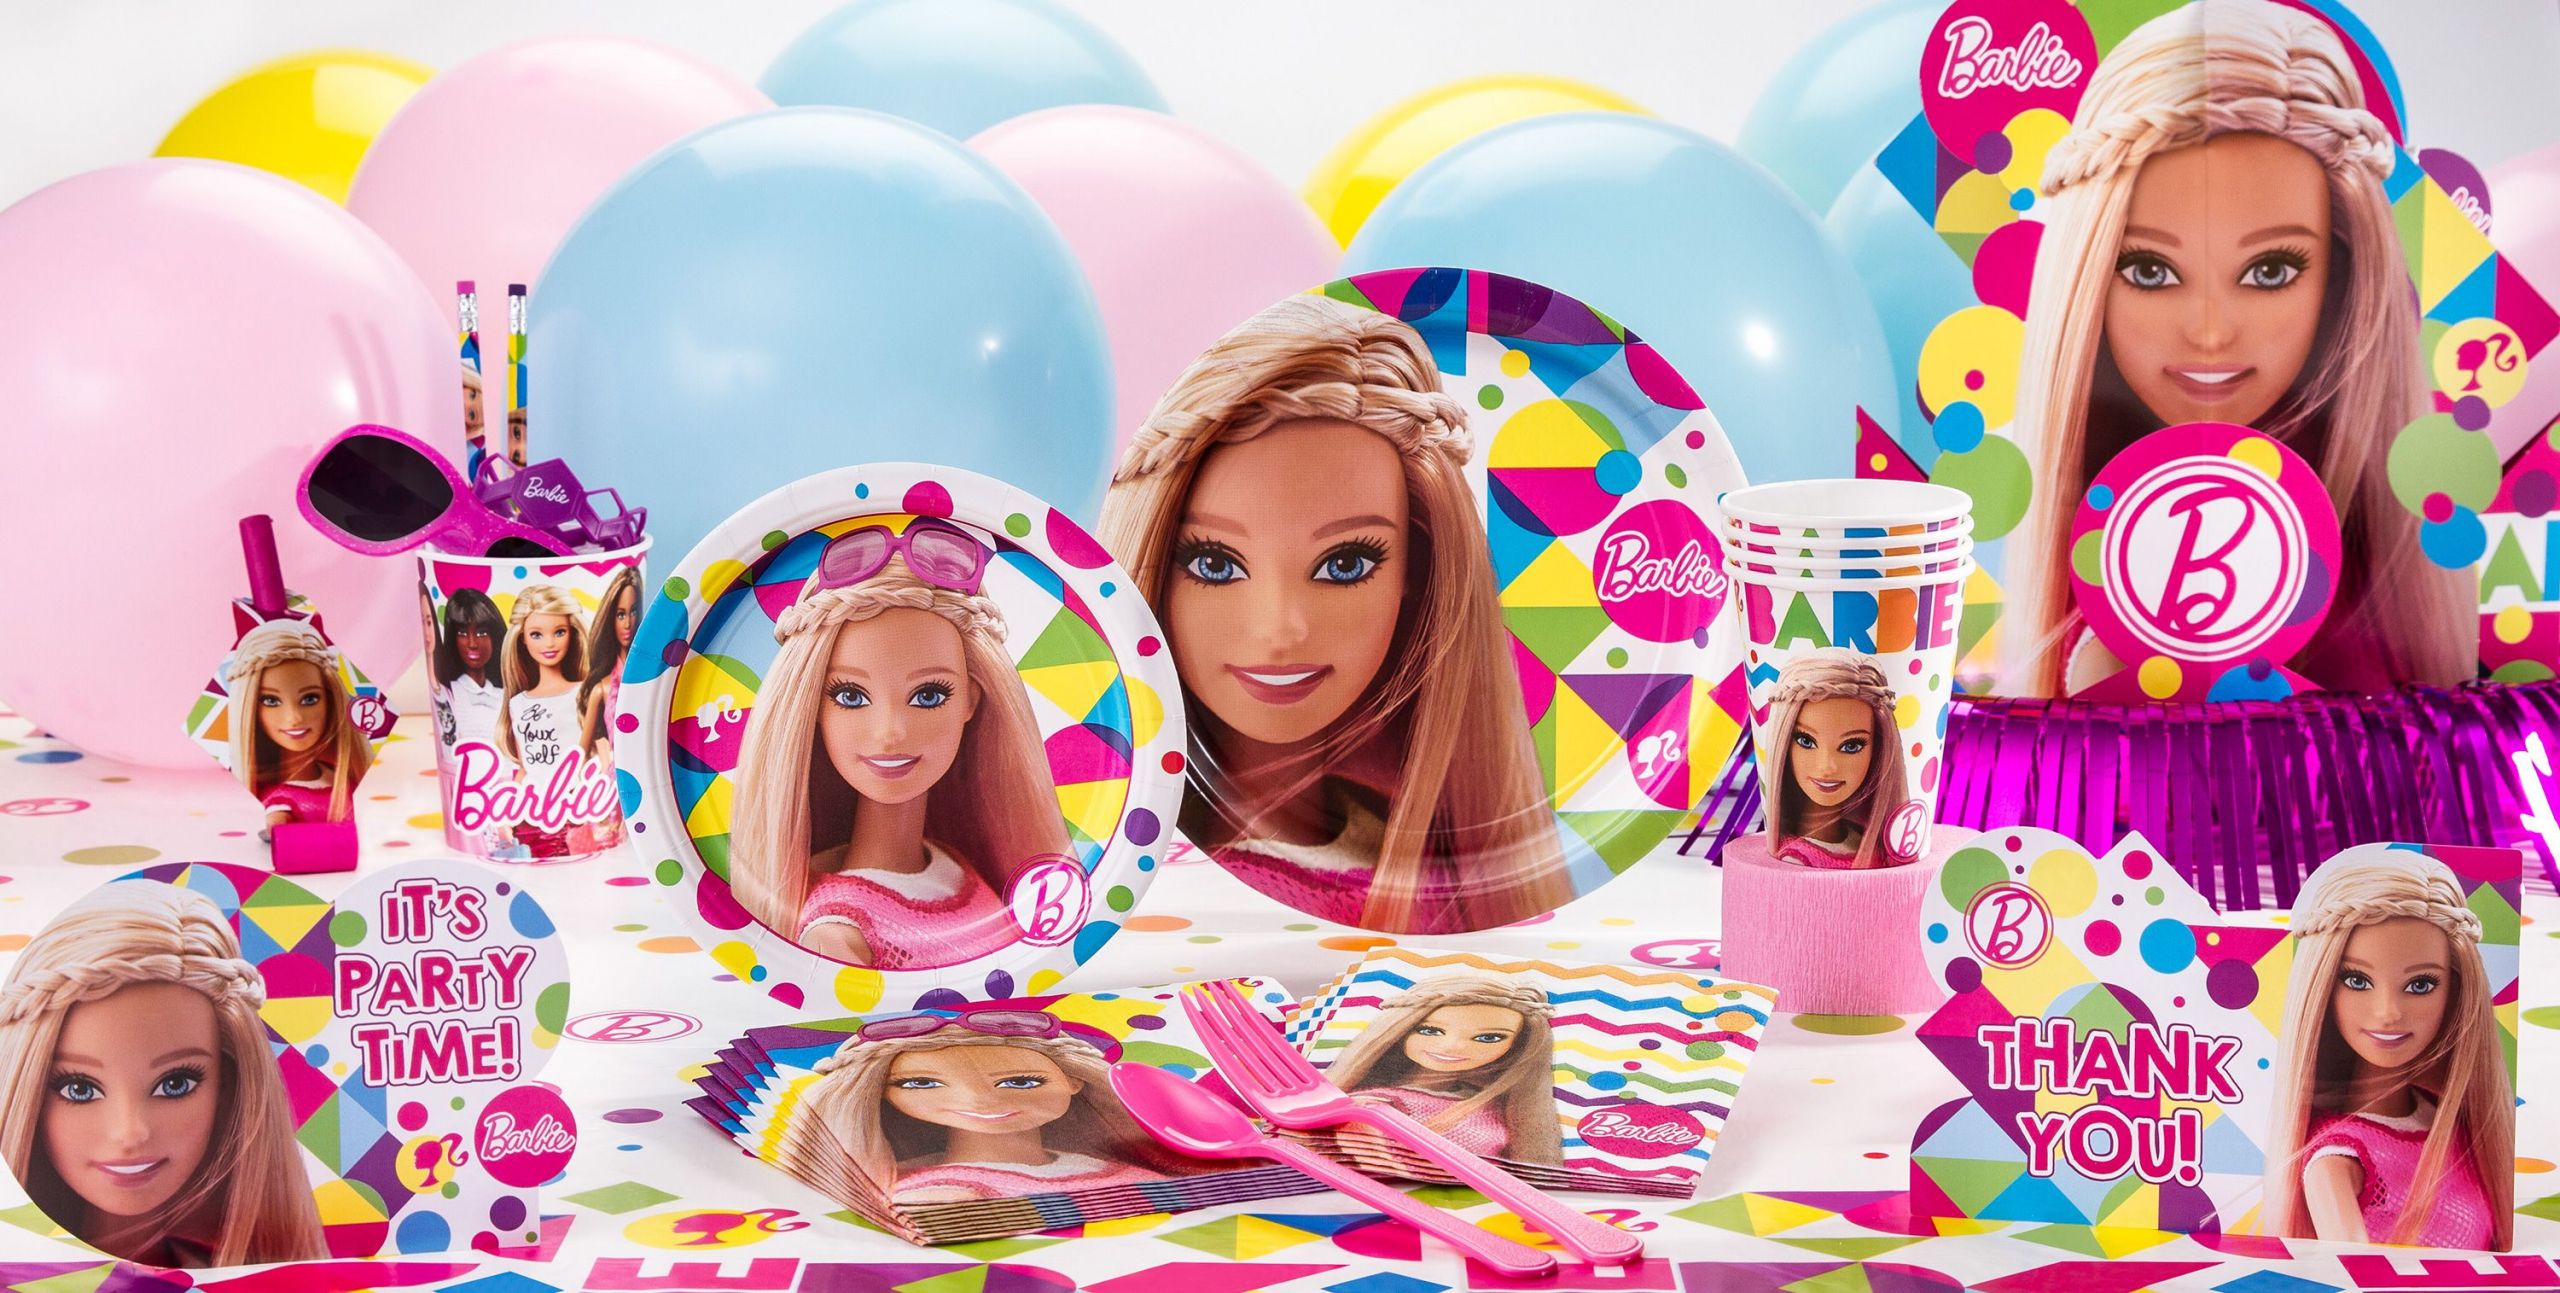 Party City Birthday Decorations
 Barbie Party Supplies Barbie Birthday